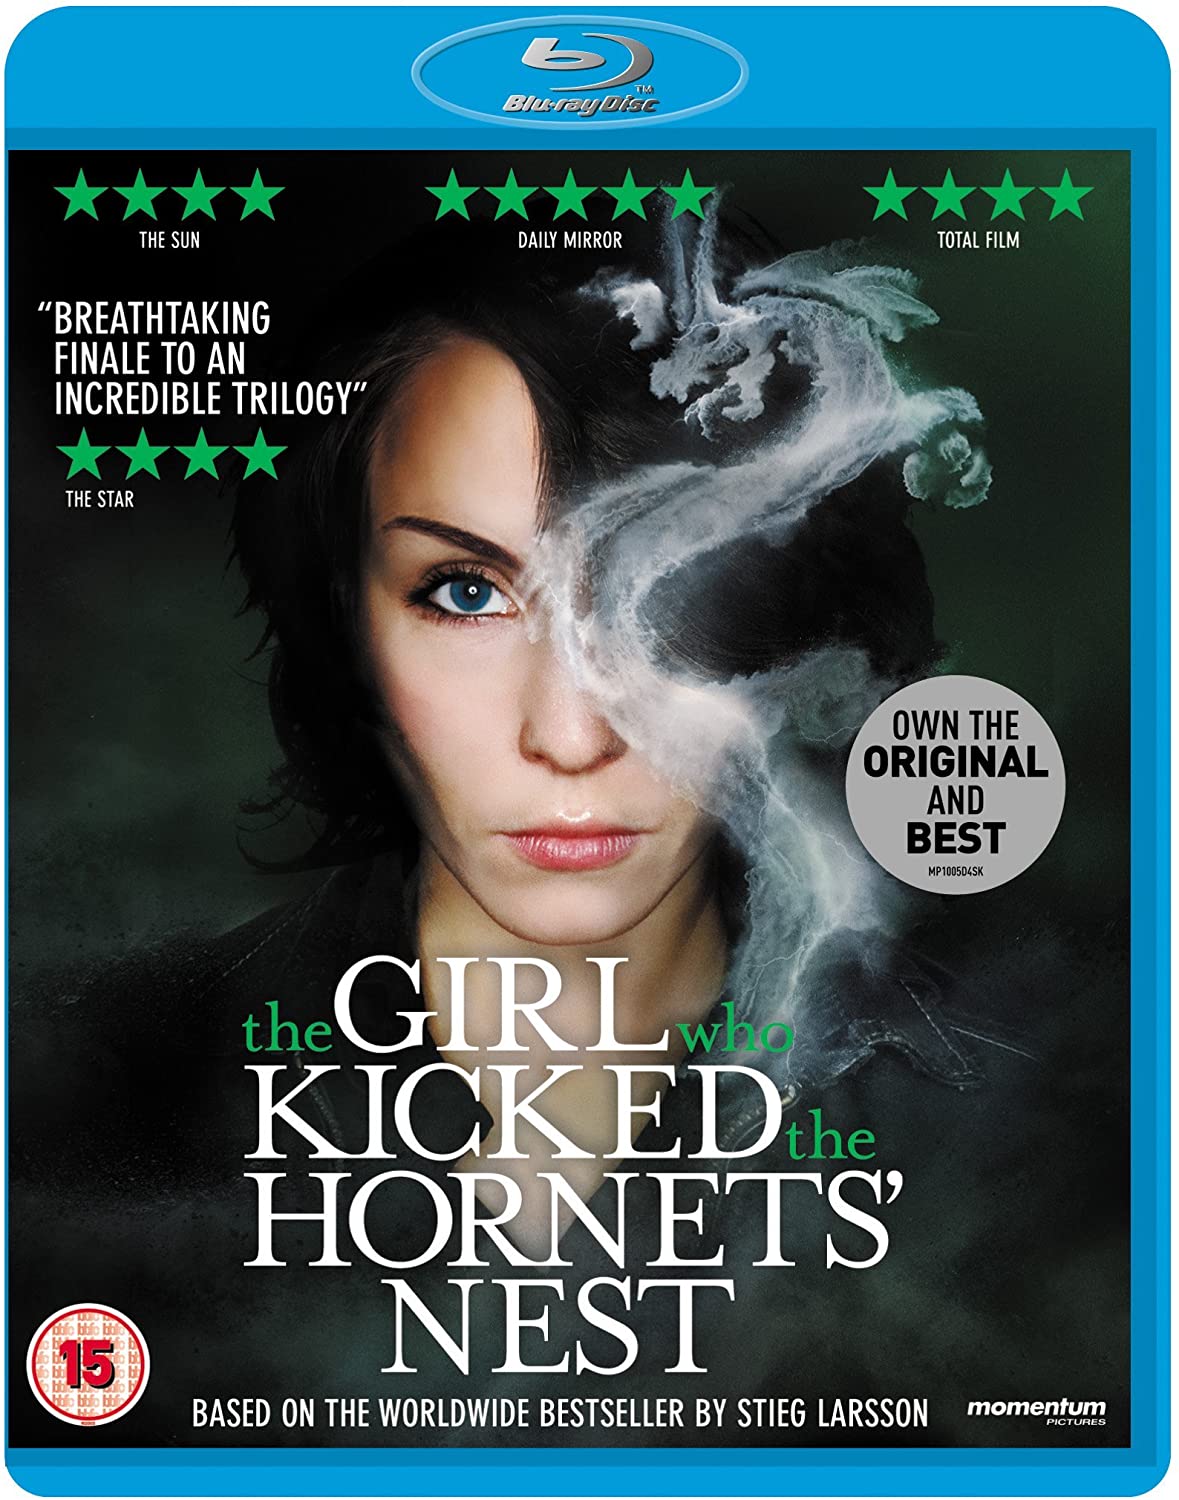 The Girl Who Kicked the Hornets' Nest [2010] (Blu-ray)